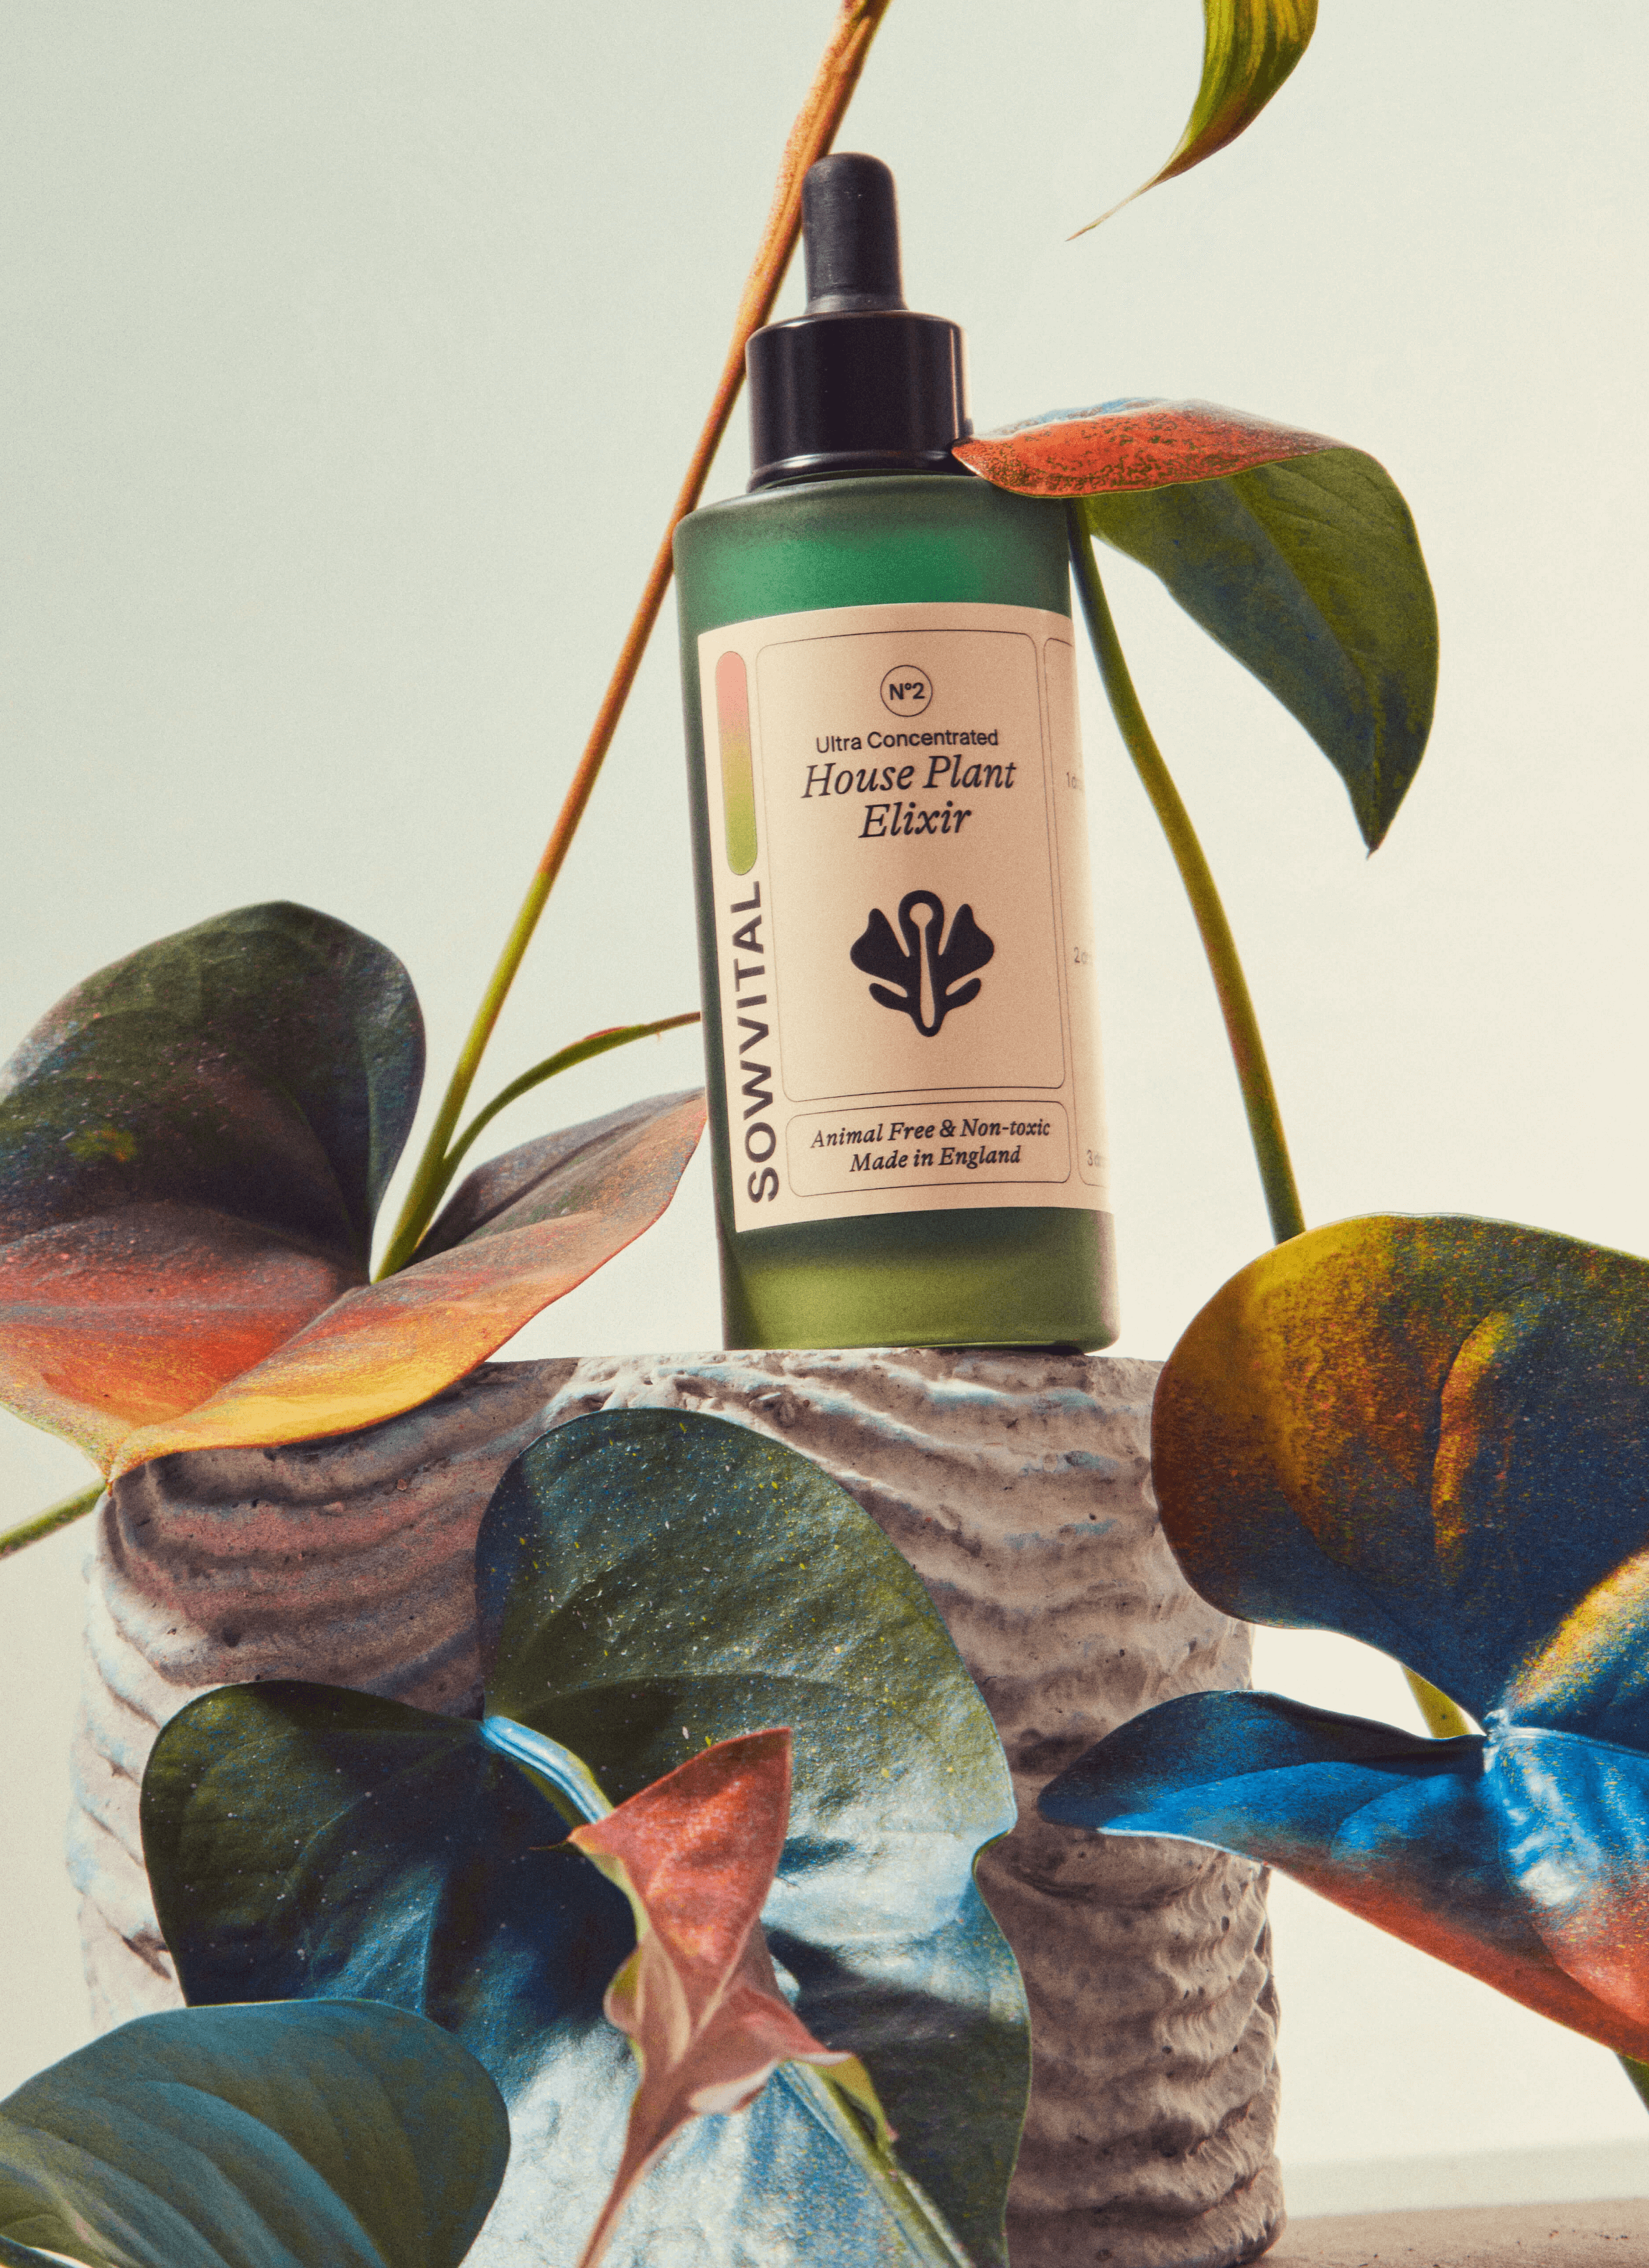 The Sowvital product - house plant elixir on a stone-like object with colourful leaves.